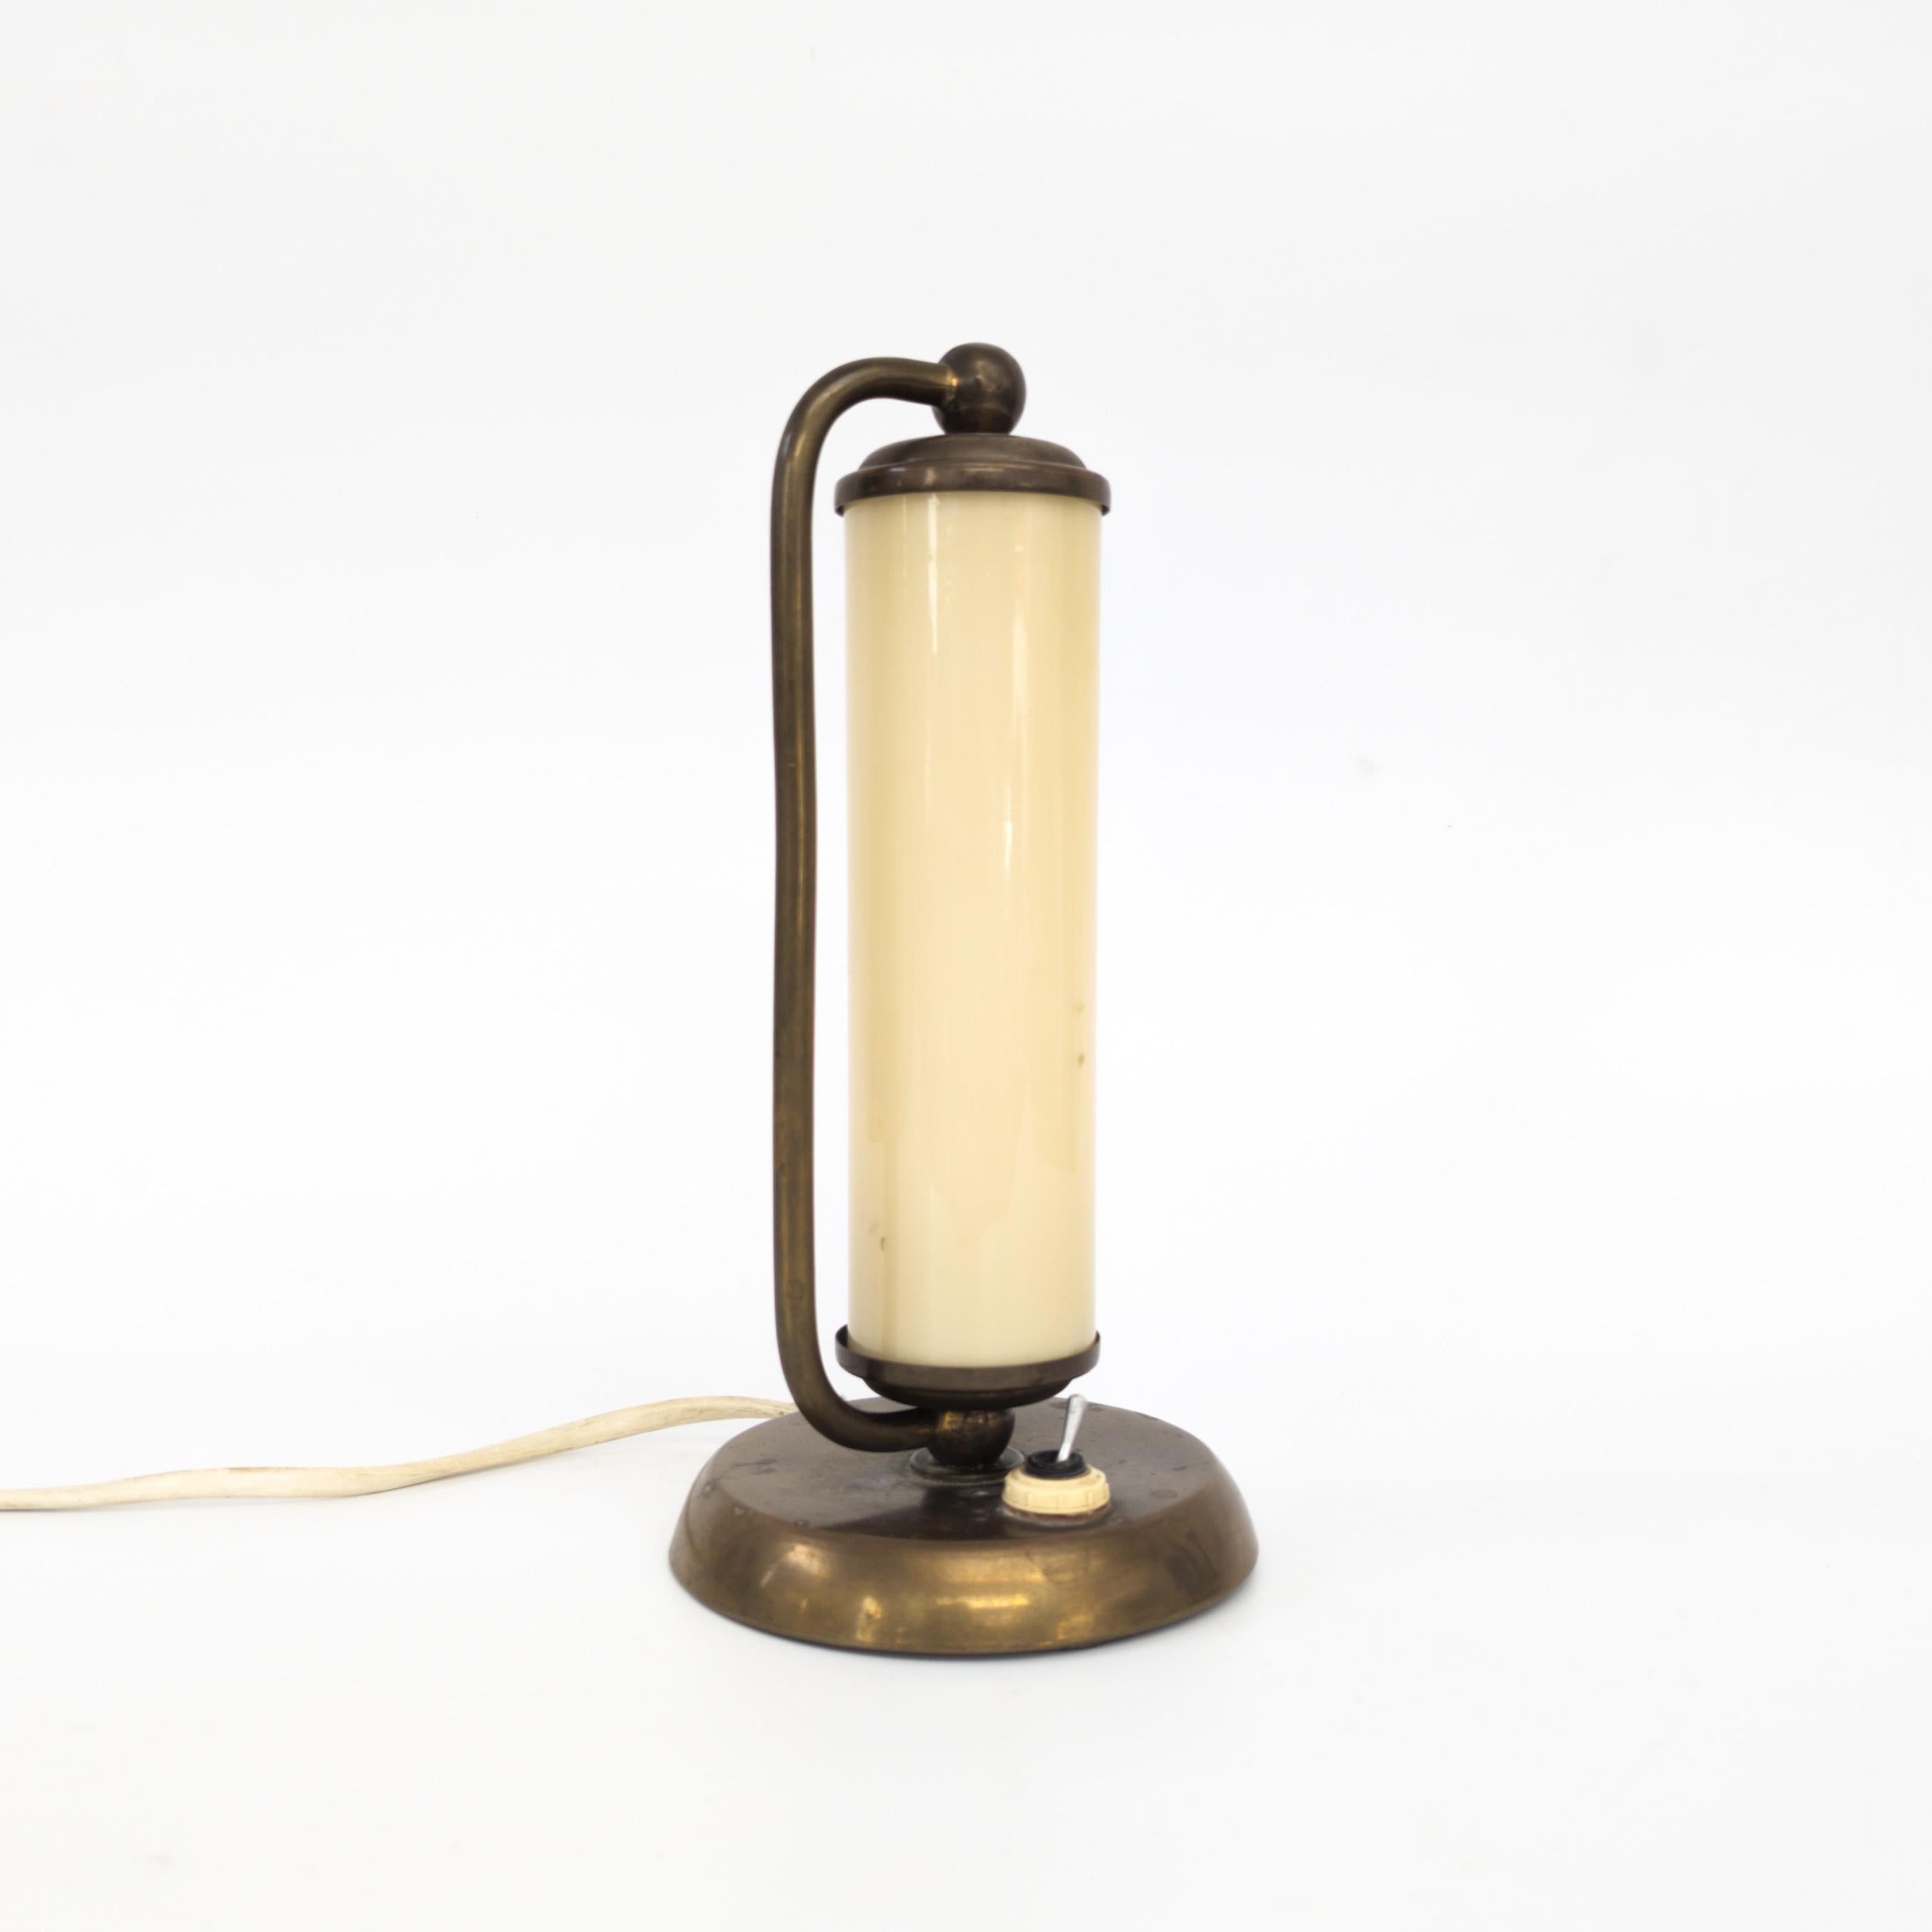 A table lamp manufactured by Napako, former Czechoslovakia in the 1930s. Beautiful Art Deco night stand lamp made of brass base with a cylindrical opaline glass shade. In good original condition, fully functional.